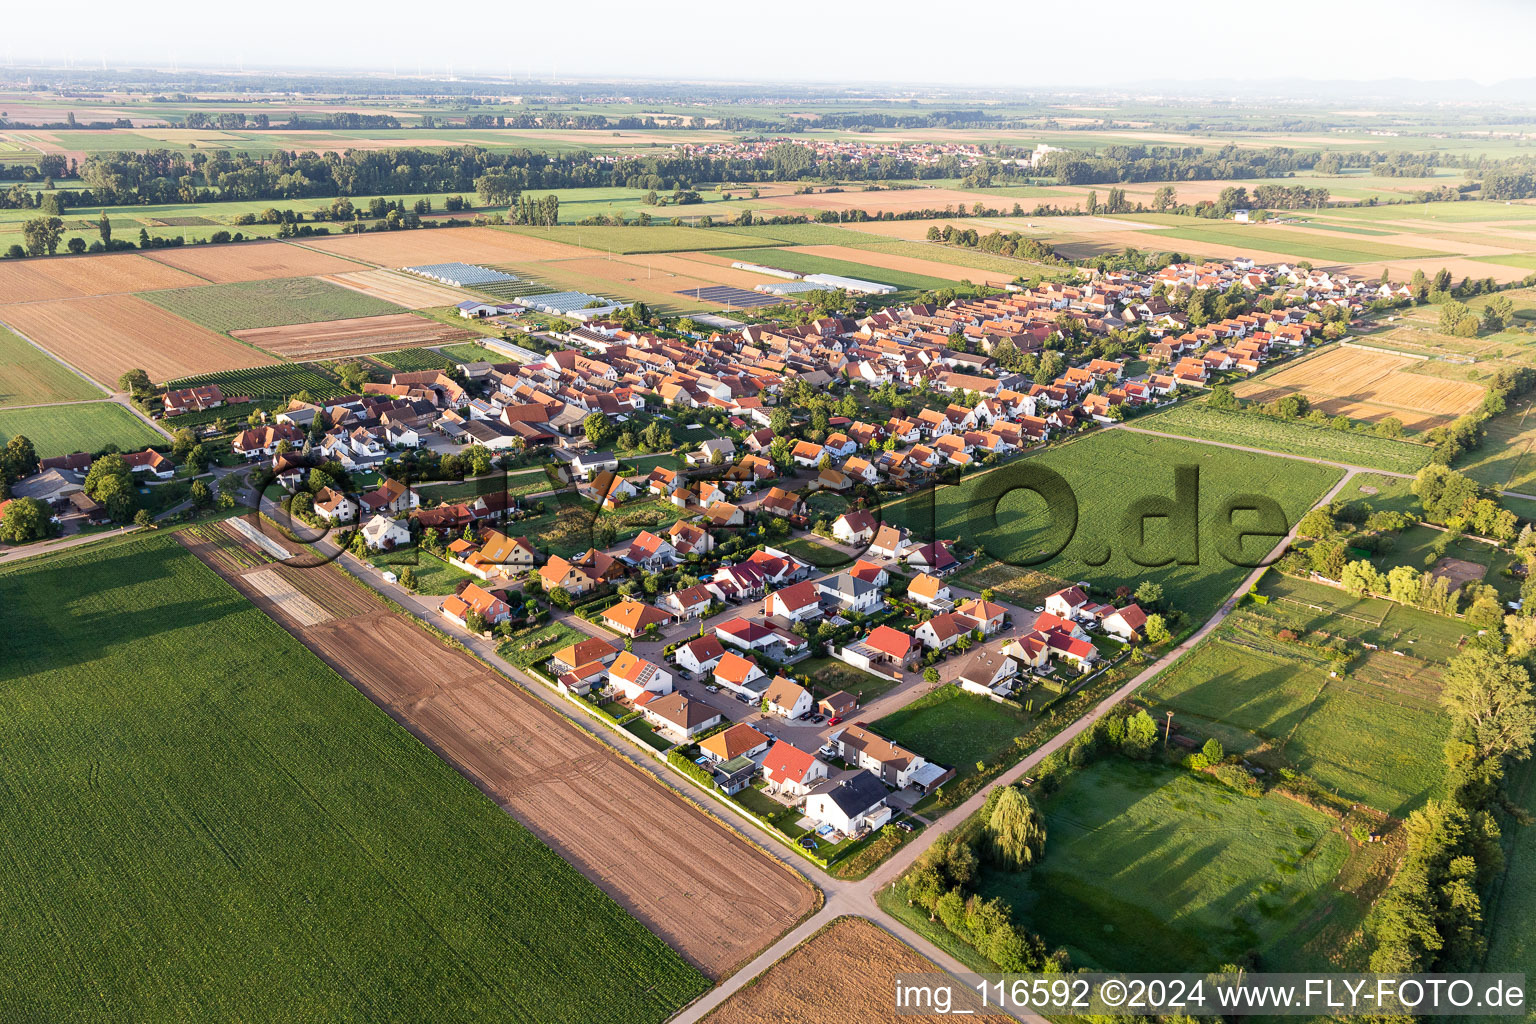 Agricultural land and field borders surround the settlement area of the village in Boebingen in the state Rhineland-Palatinate, Germany from above